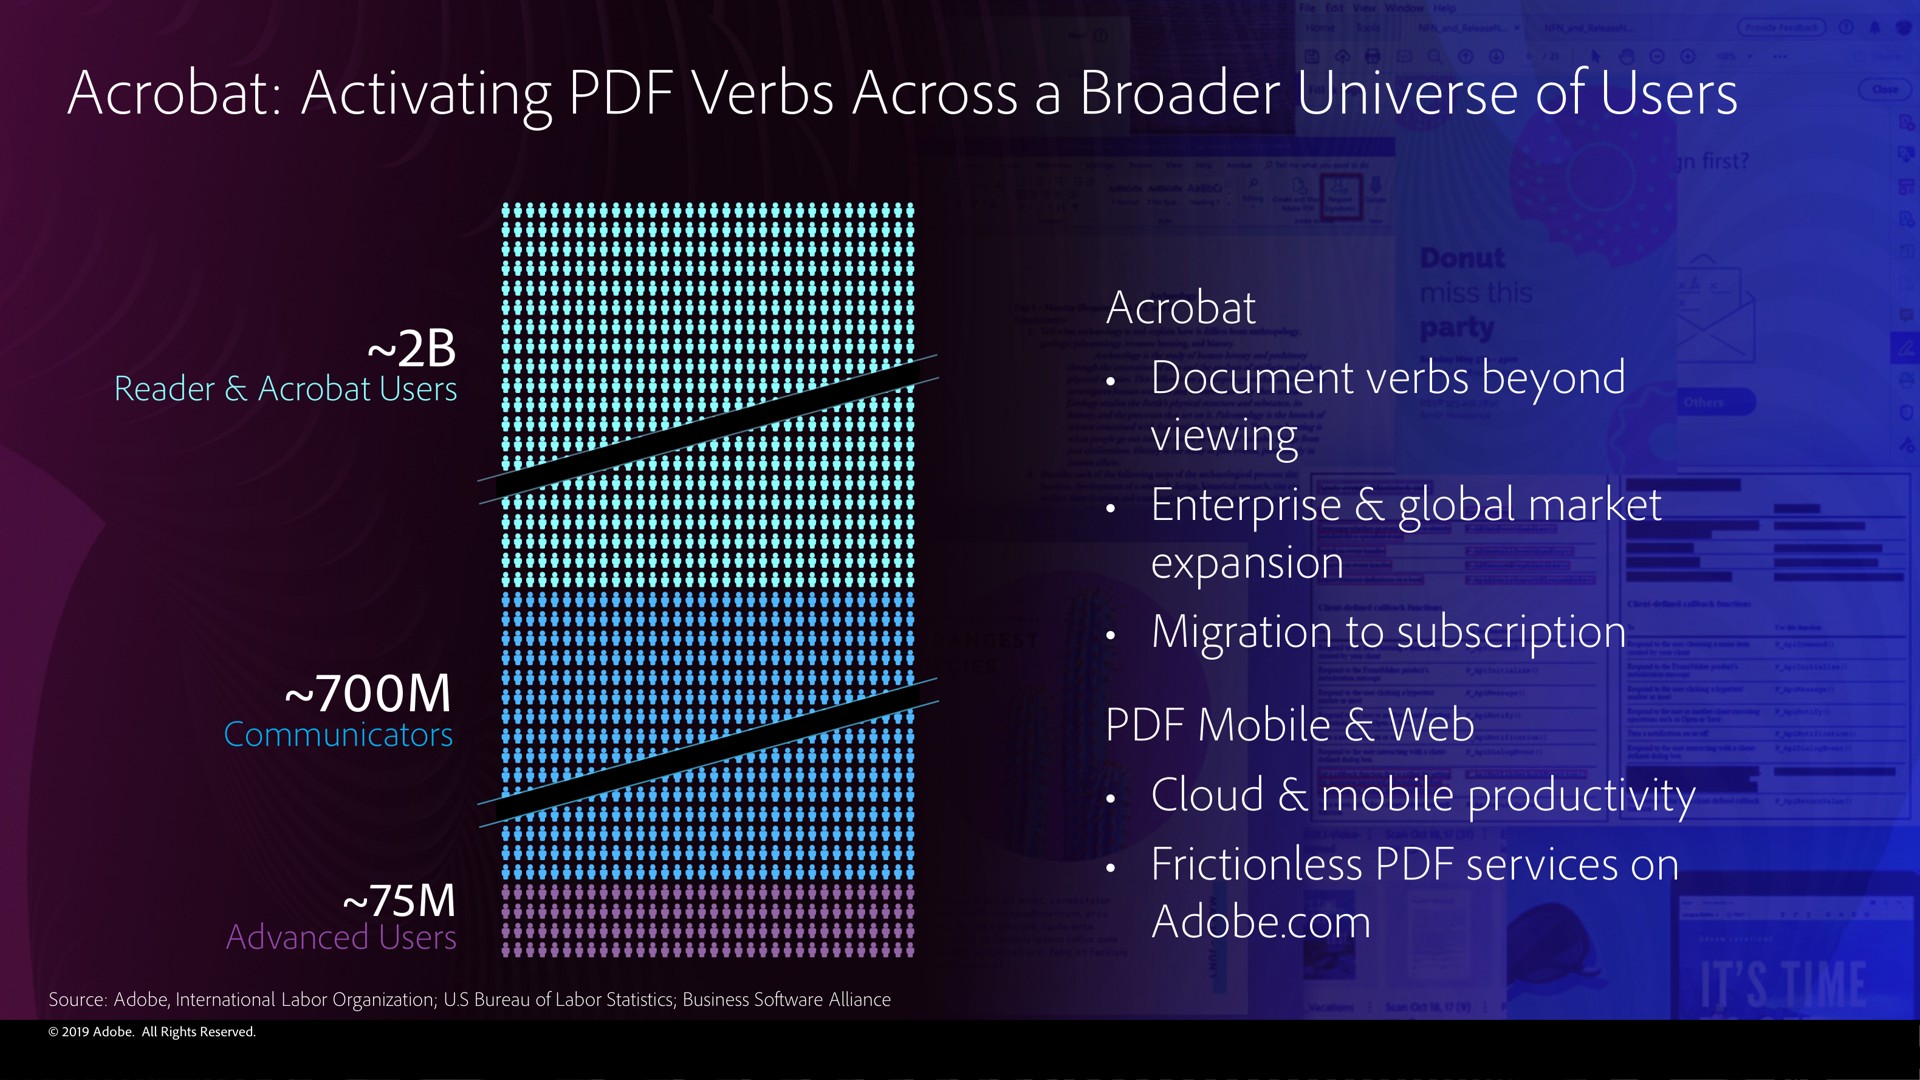 acrobat activating verbs across a universe of users me | Adobe